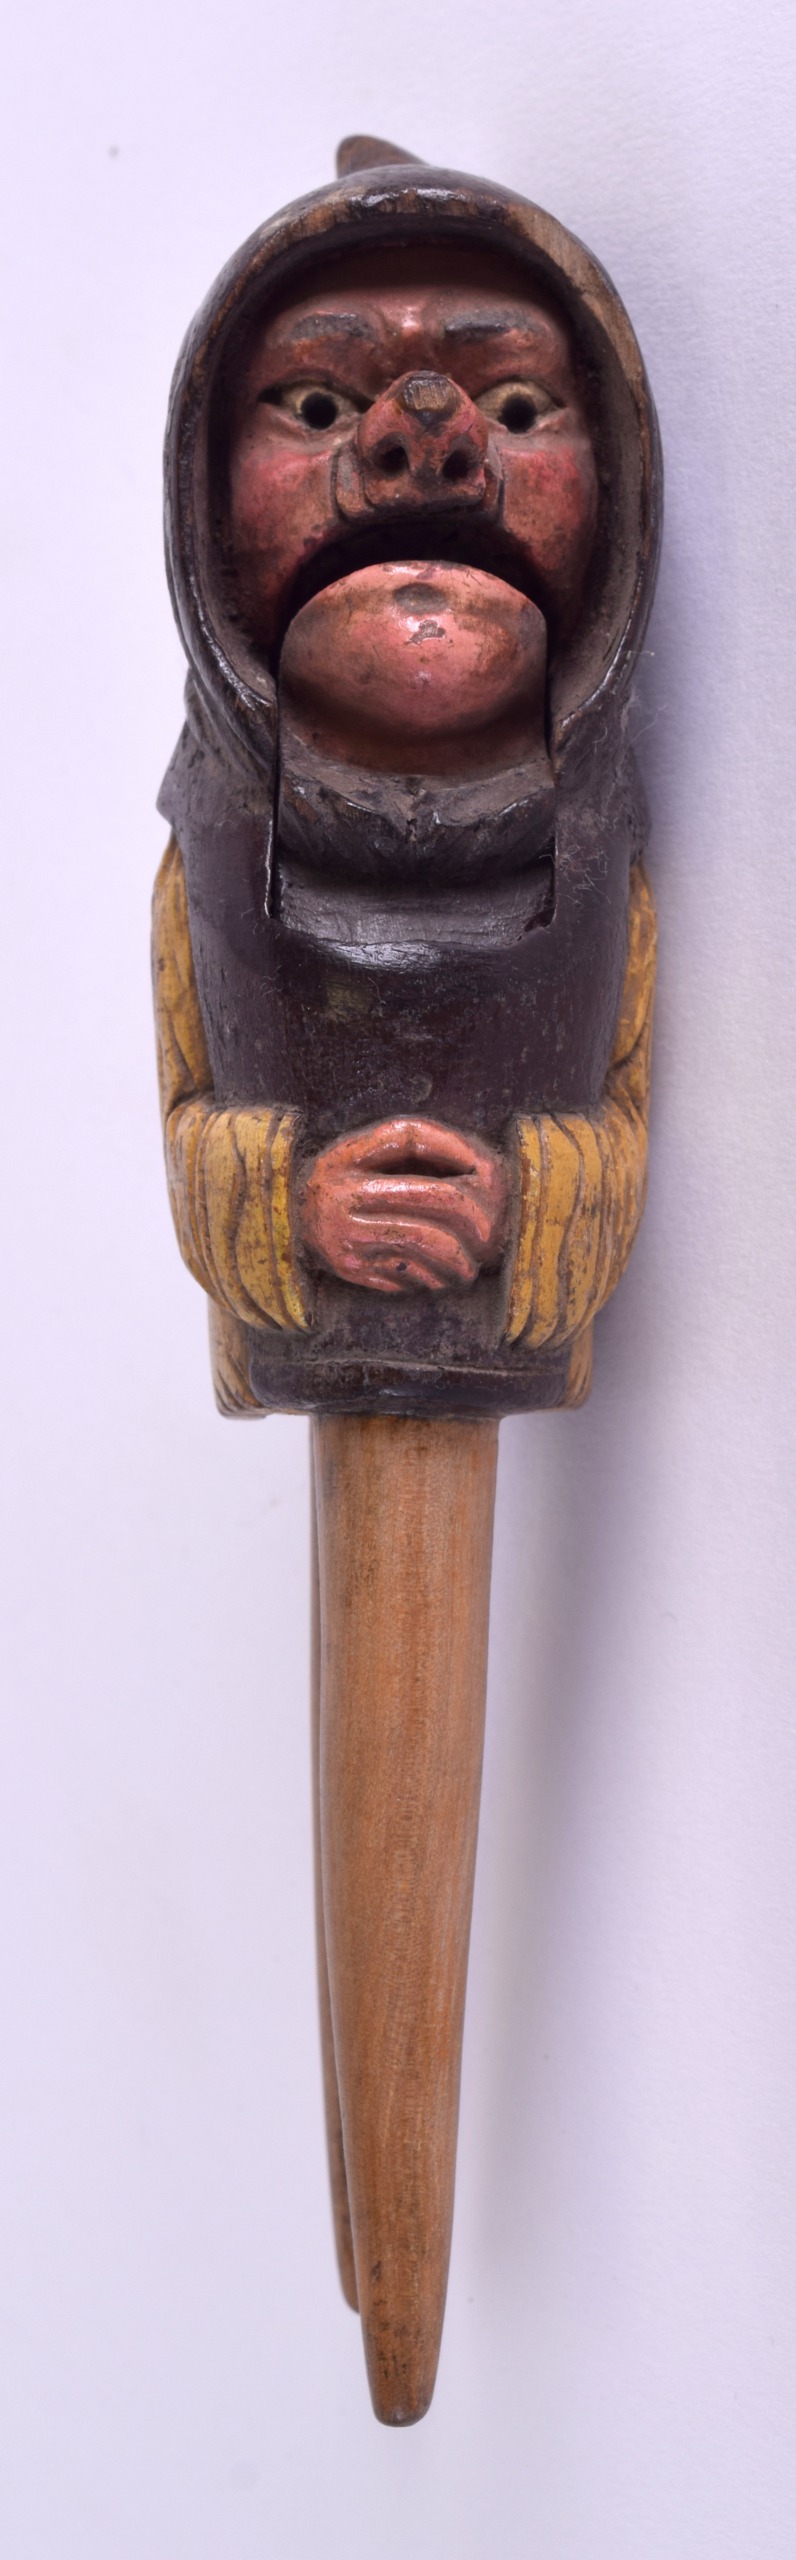 A RARE PAIR OF LATE 19TH CENTURY BAVARIAN PAINTED NUT CRACKERS in the form of a gnome with large - Bild 2 aus 4